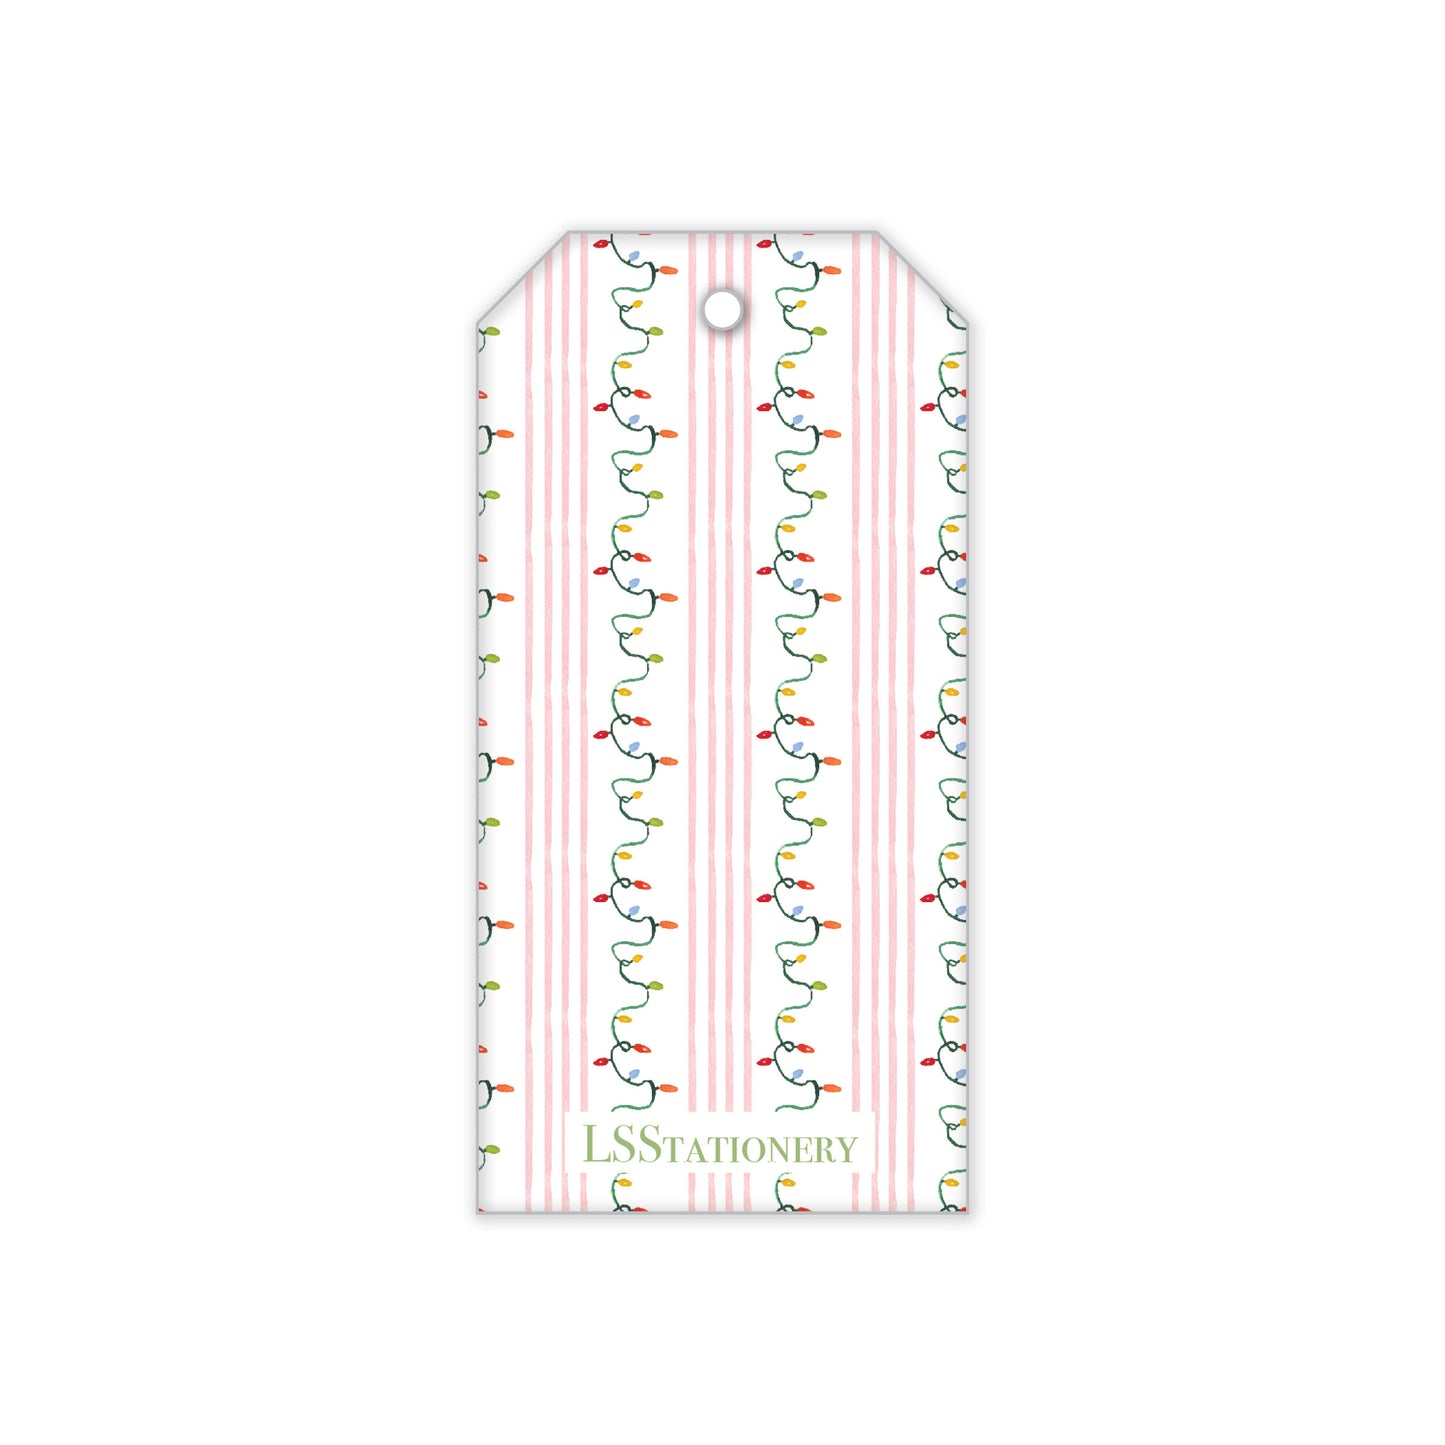 Garland with Lights Pastel Gift Tag